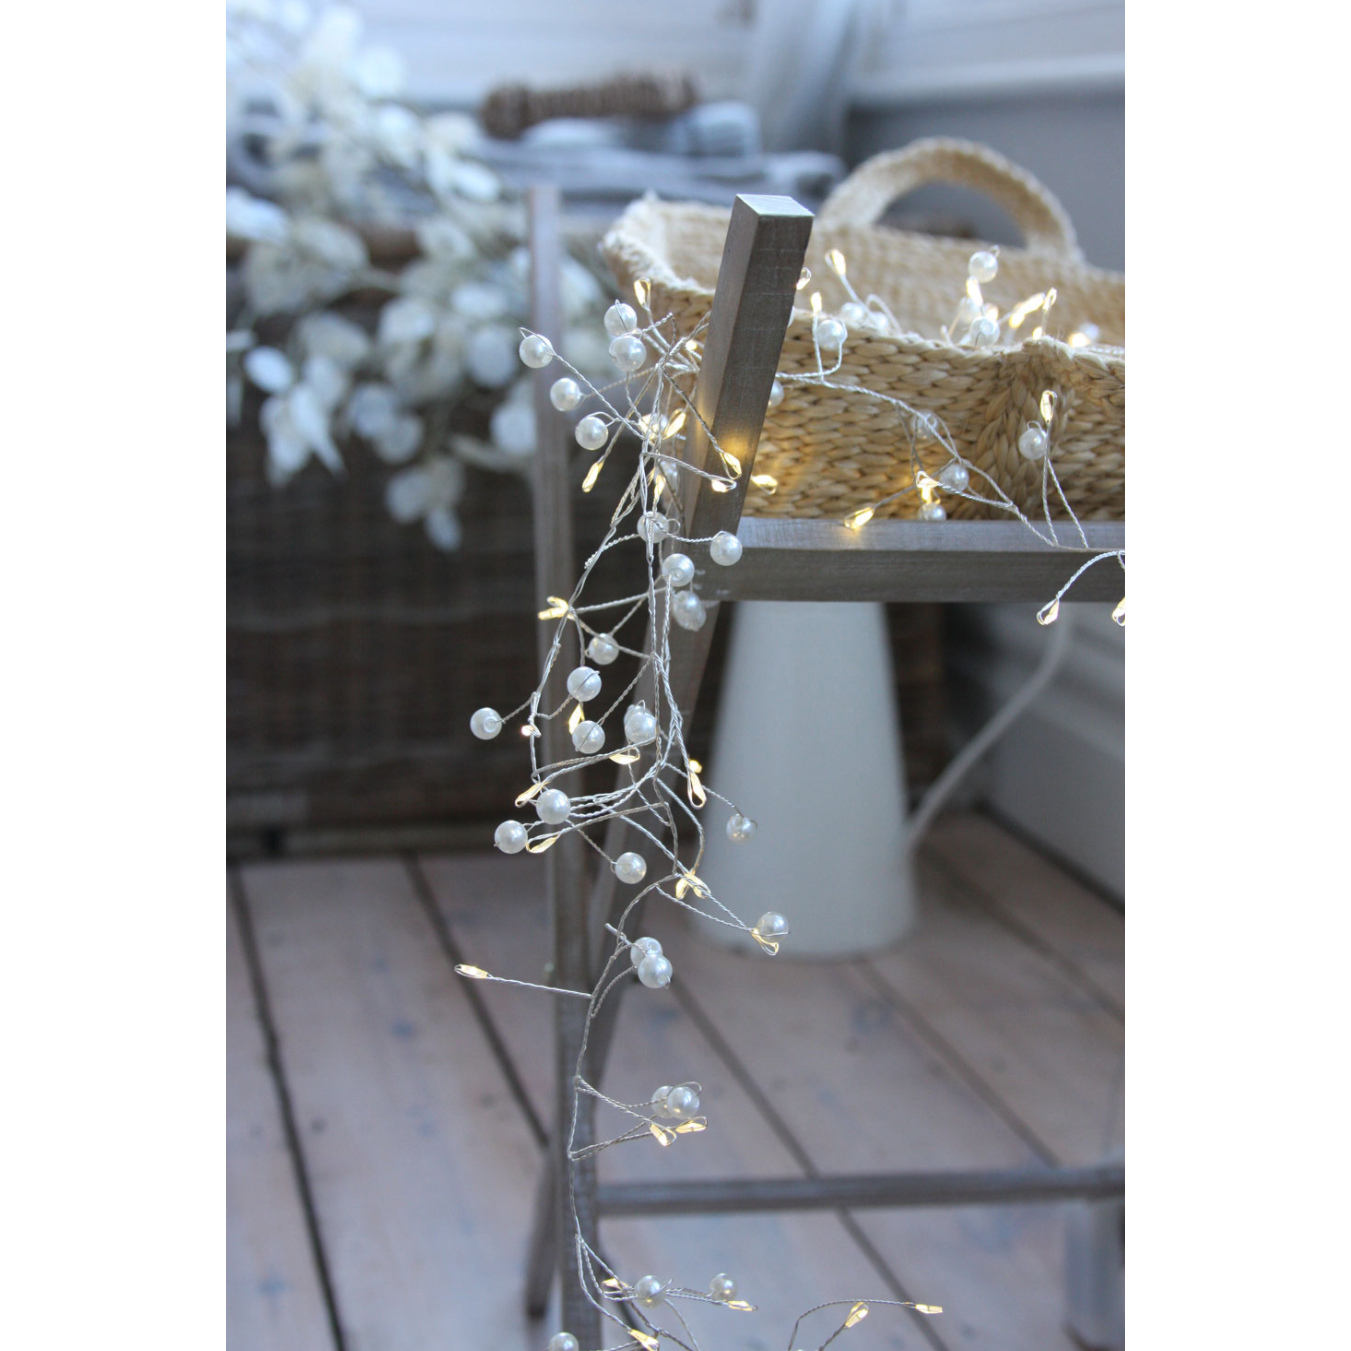 Pearl Cluster Lights - Classy Timeless Design